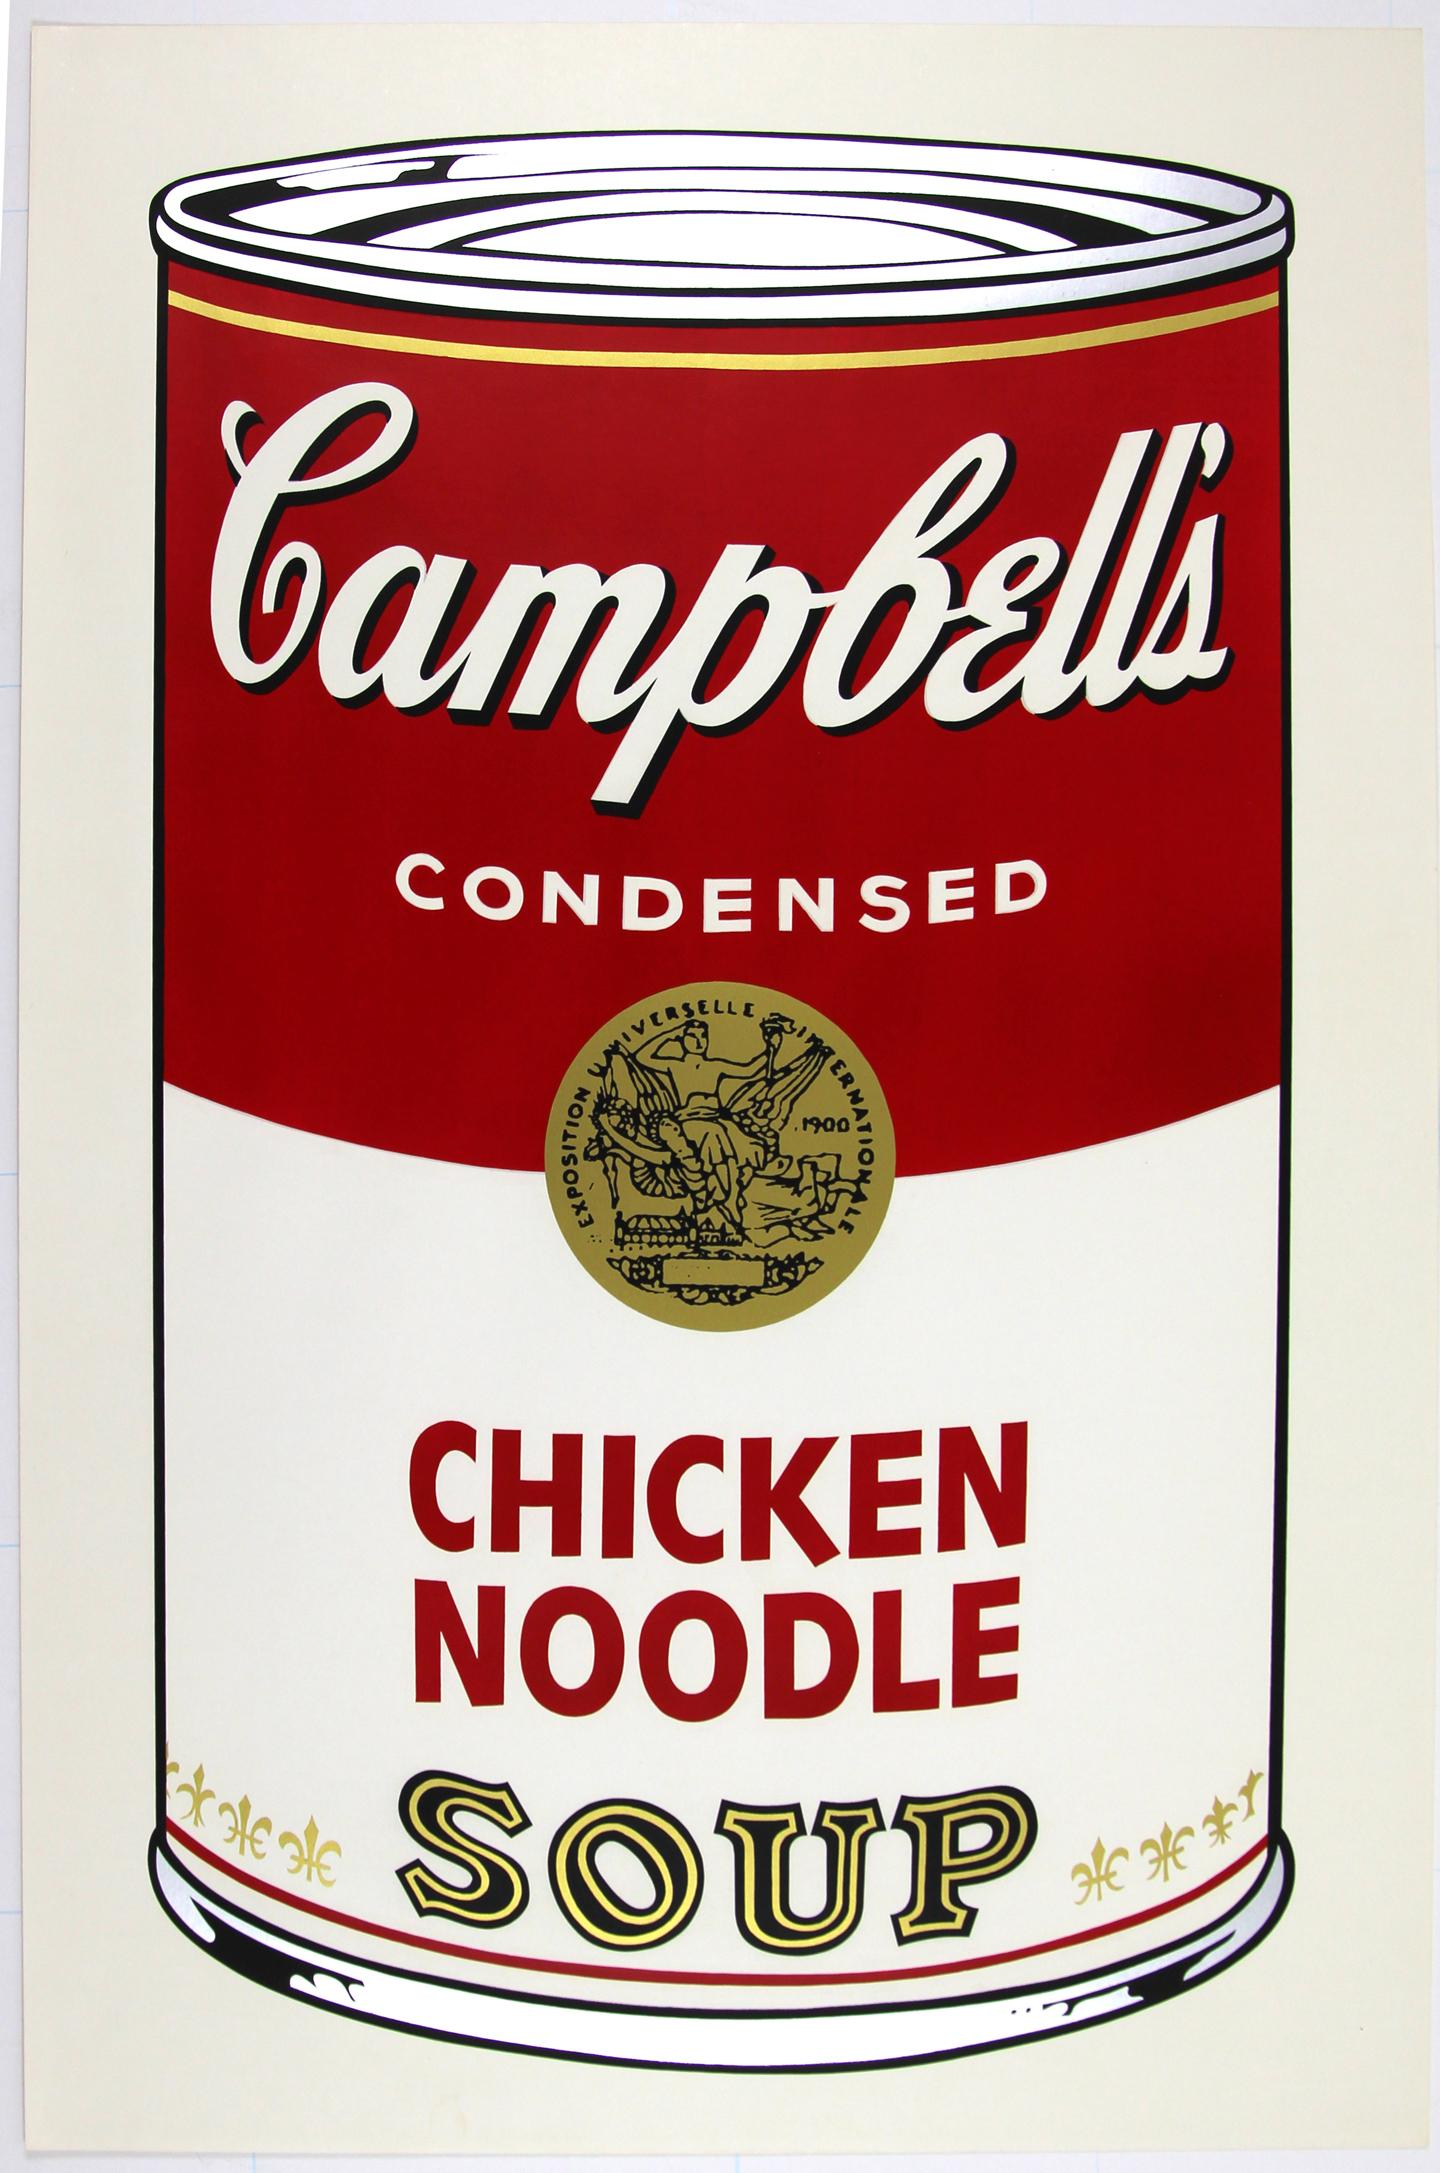 Andy Warhol Interior Print - Campbell's Soup I Chicken Noodle F&S II.45